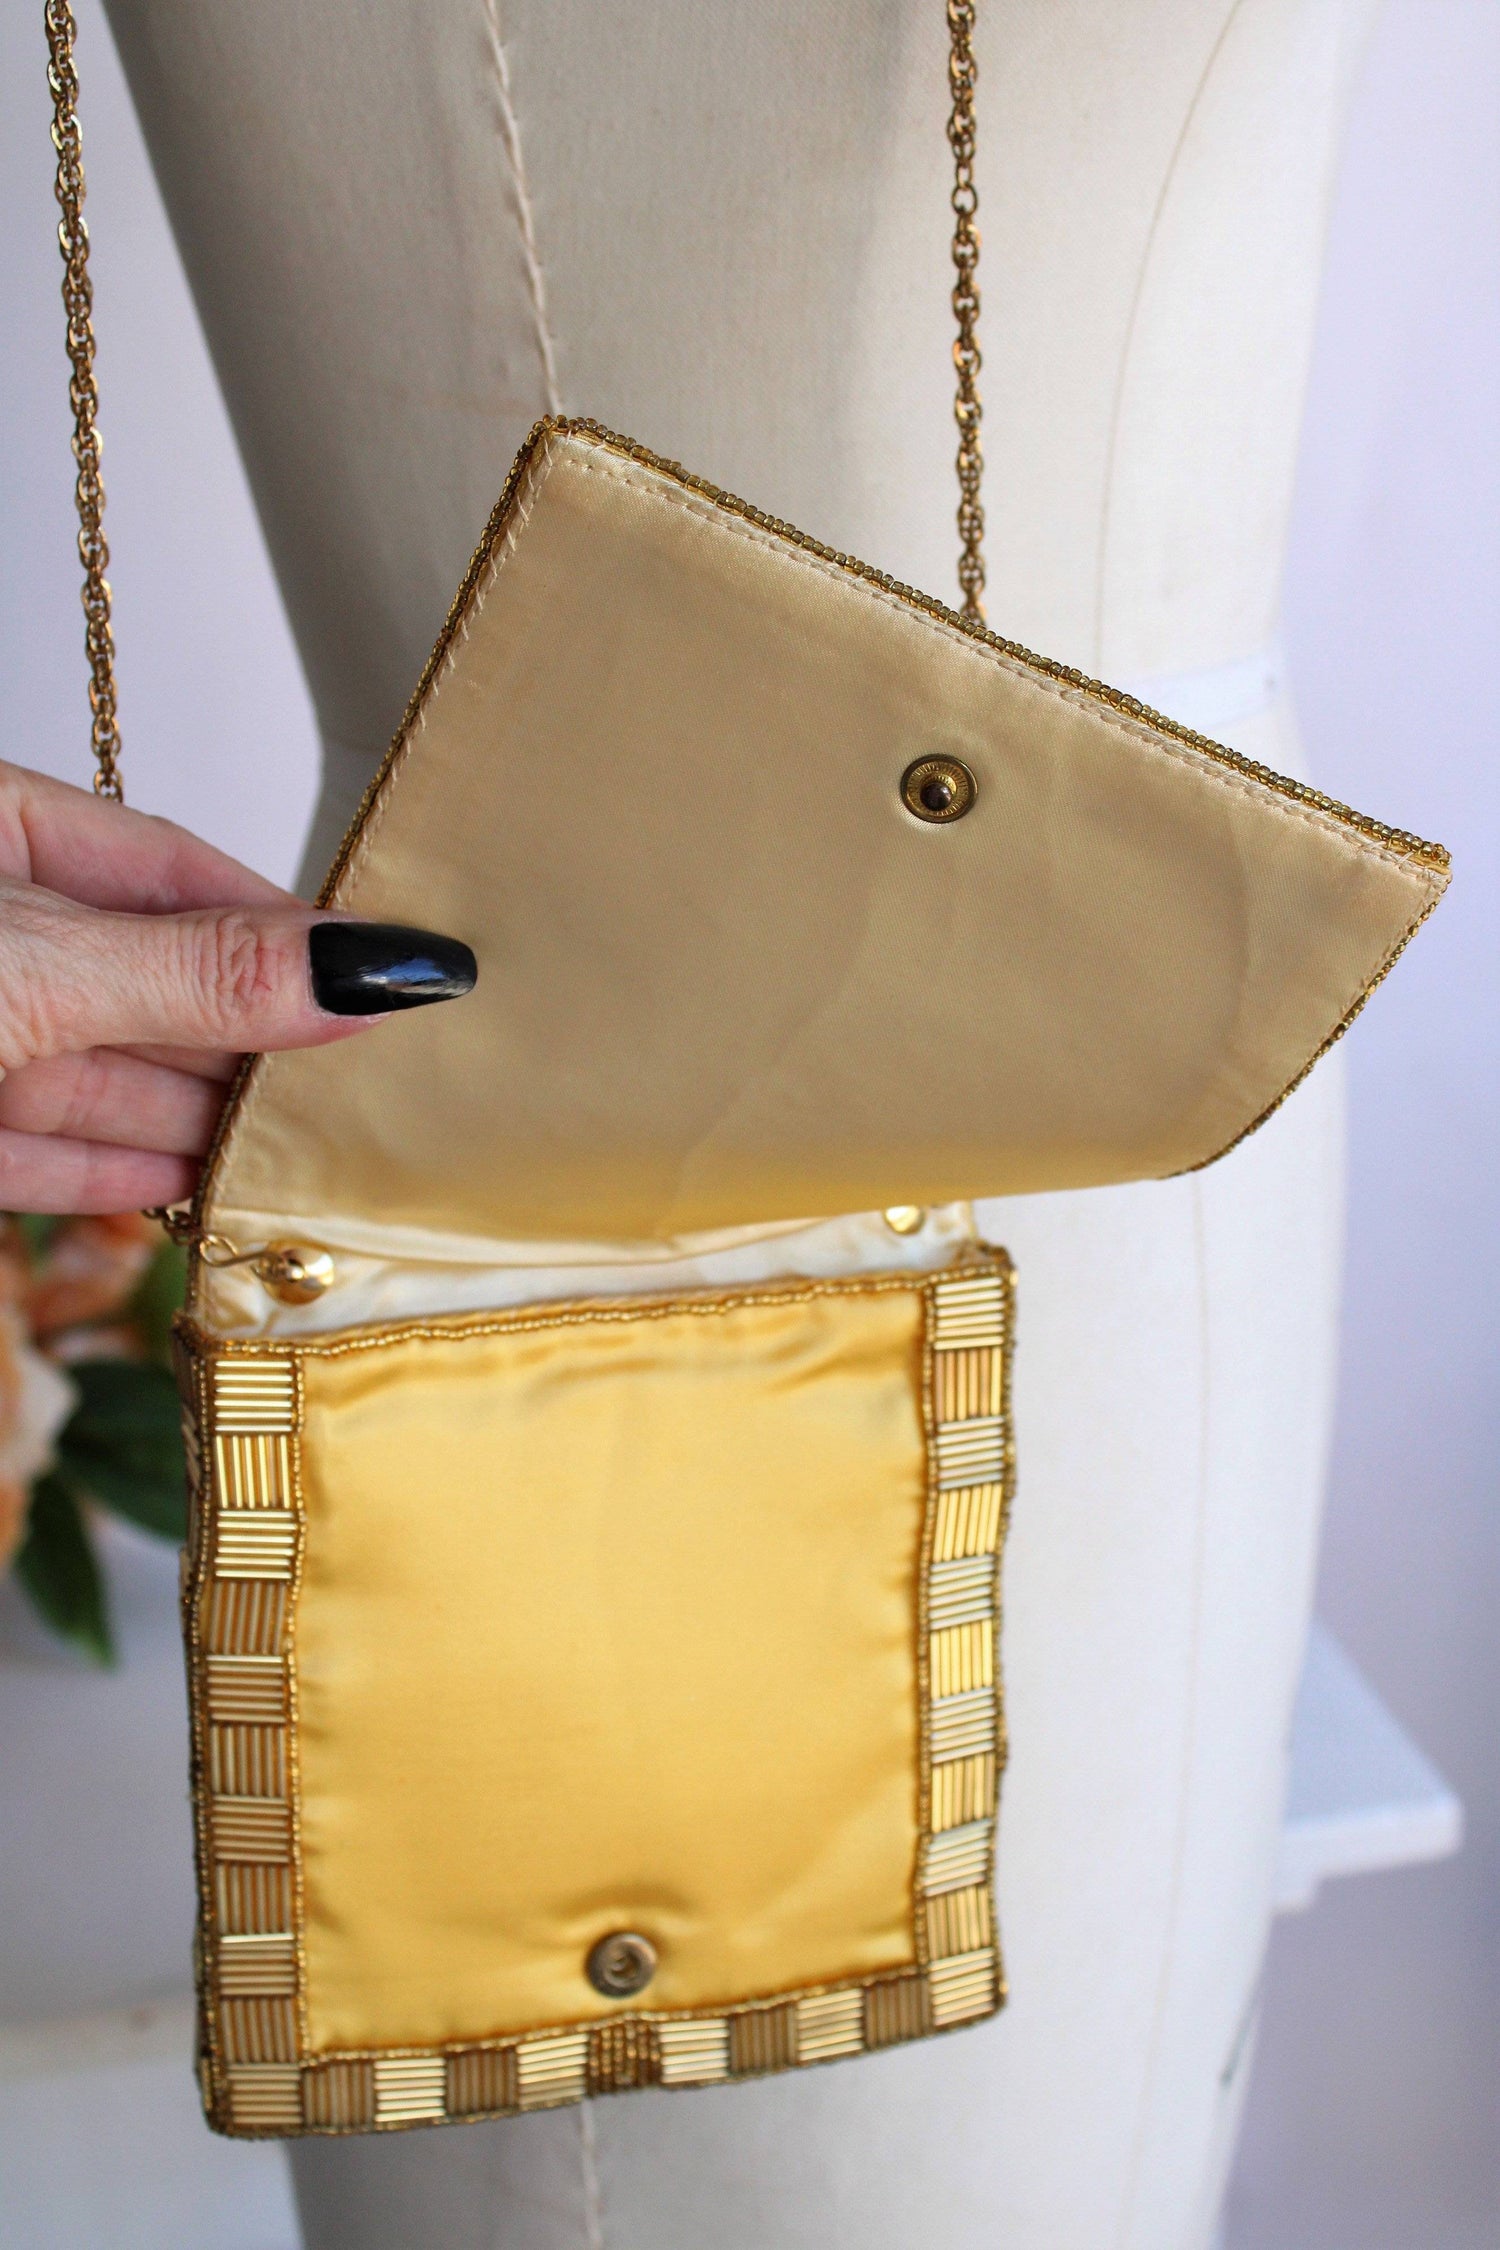 Gold and Ivory Beaded Clutch or Handbag